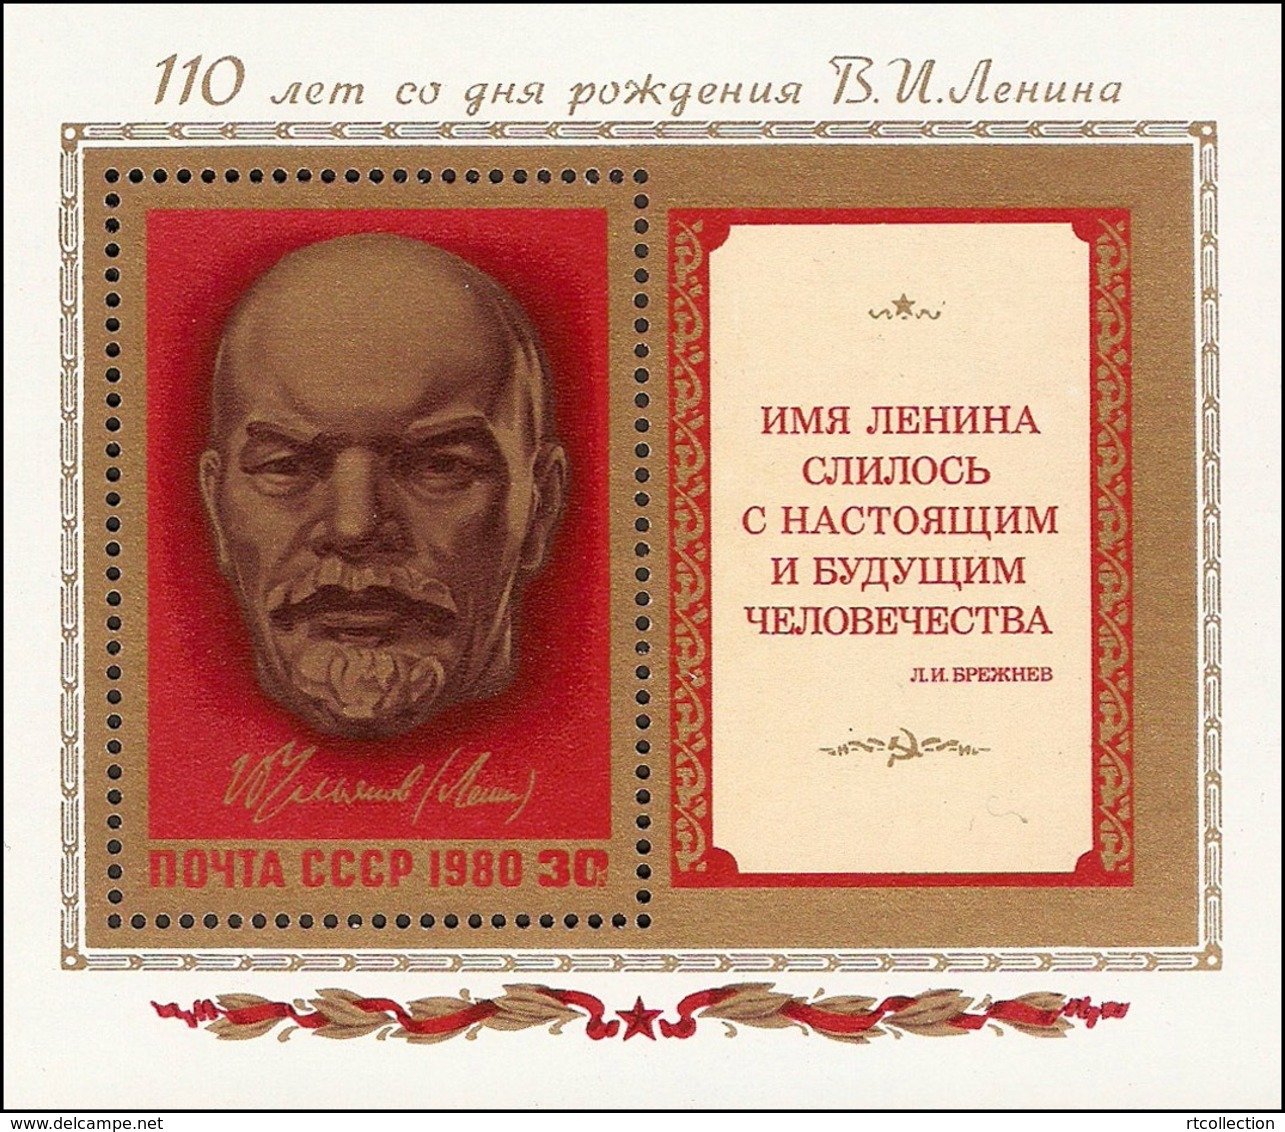 USSR Russia 1985 115th Birth Anniversary Lenin Soviet Union Communist Party Famous People Politician S/S Stamp MNH - Lenin